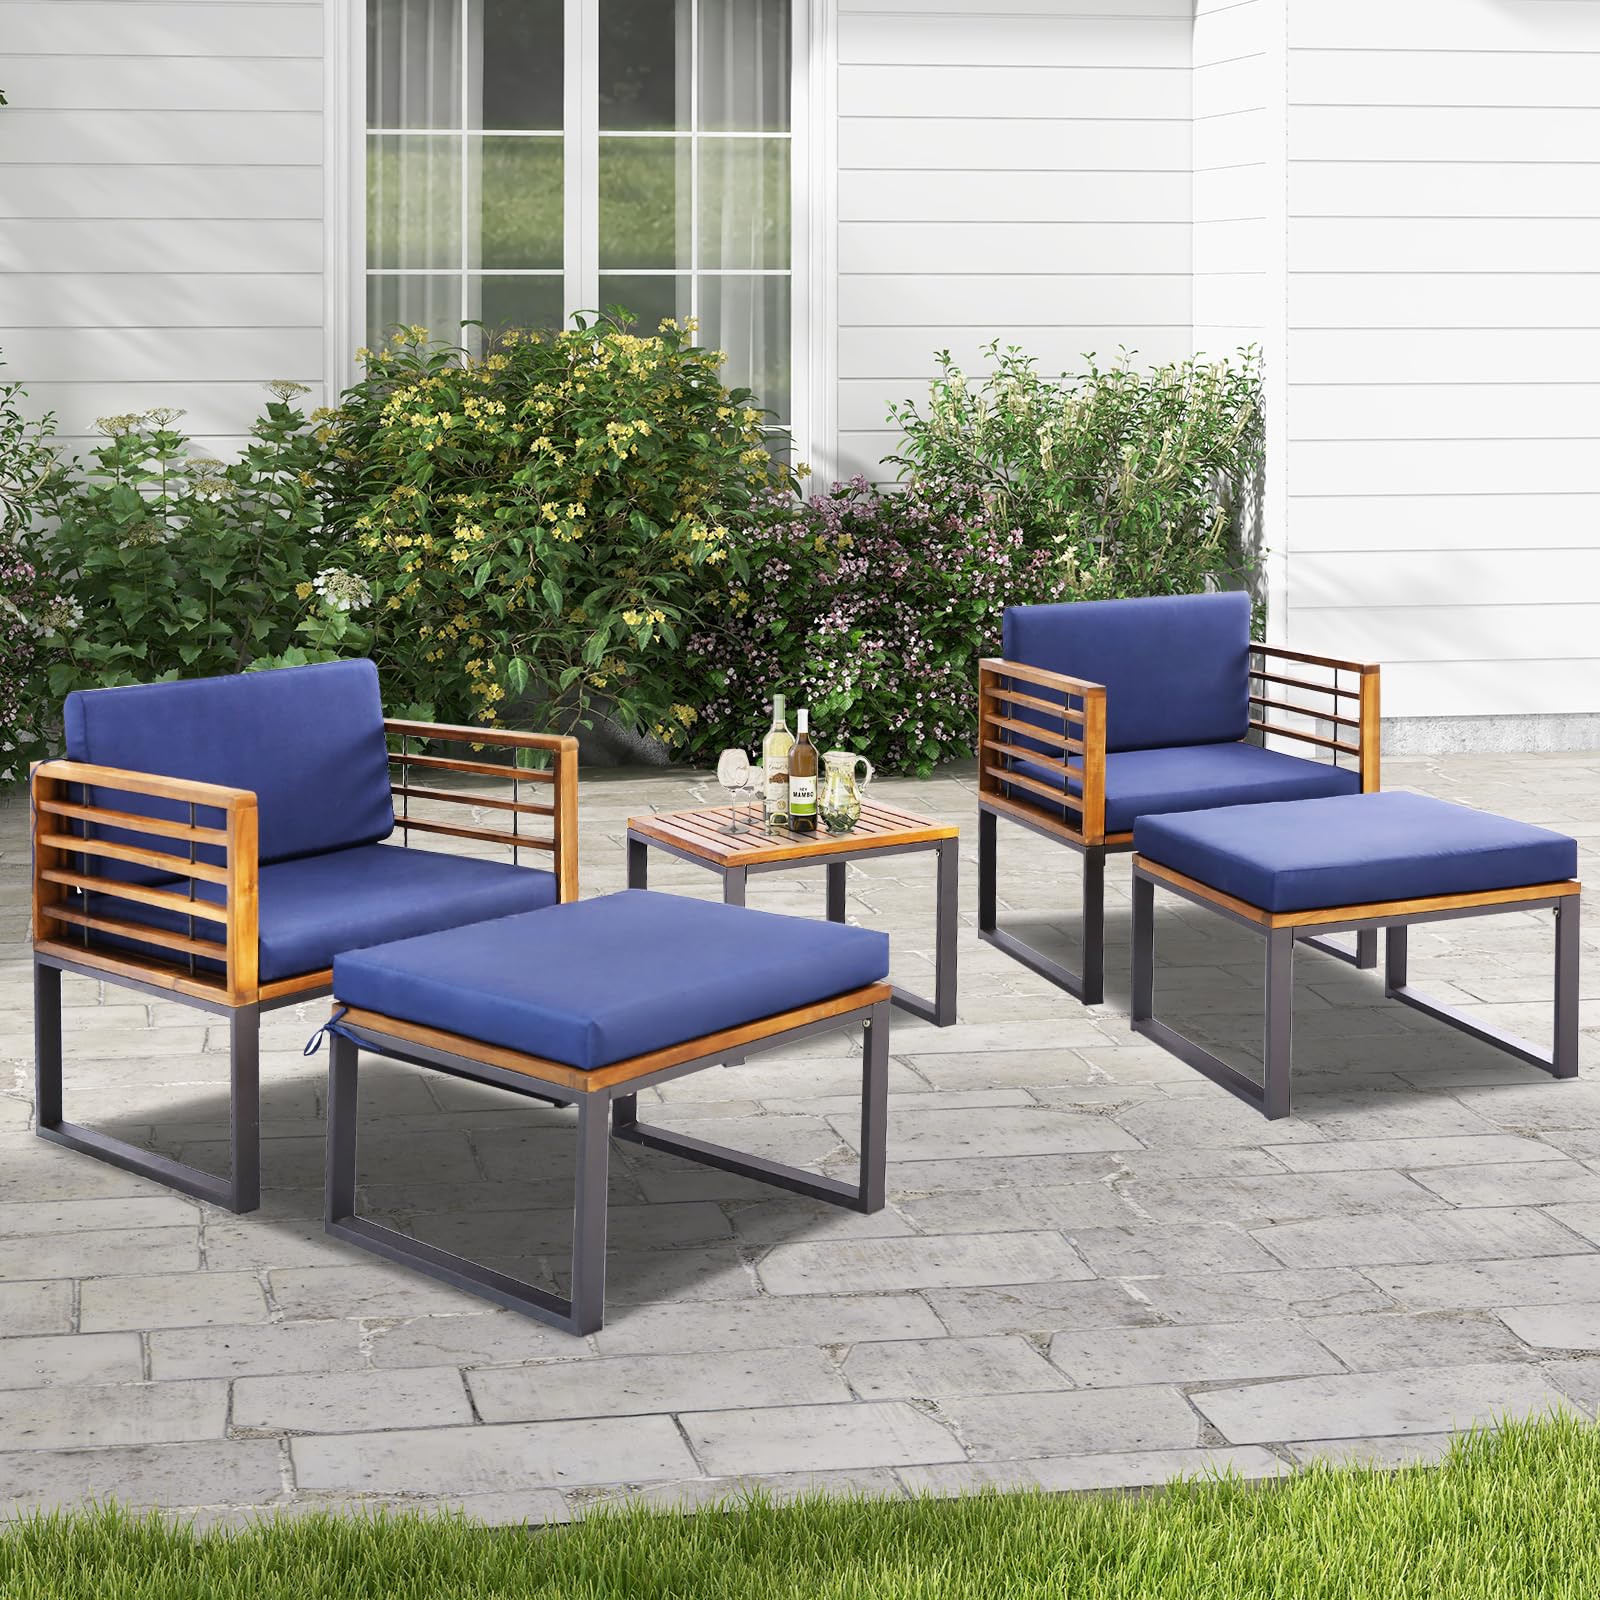 The Top 10 Benefits of Multi-Material Patio Furniture